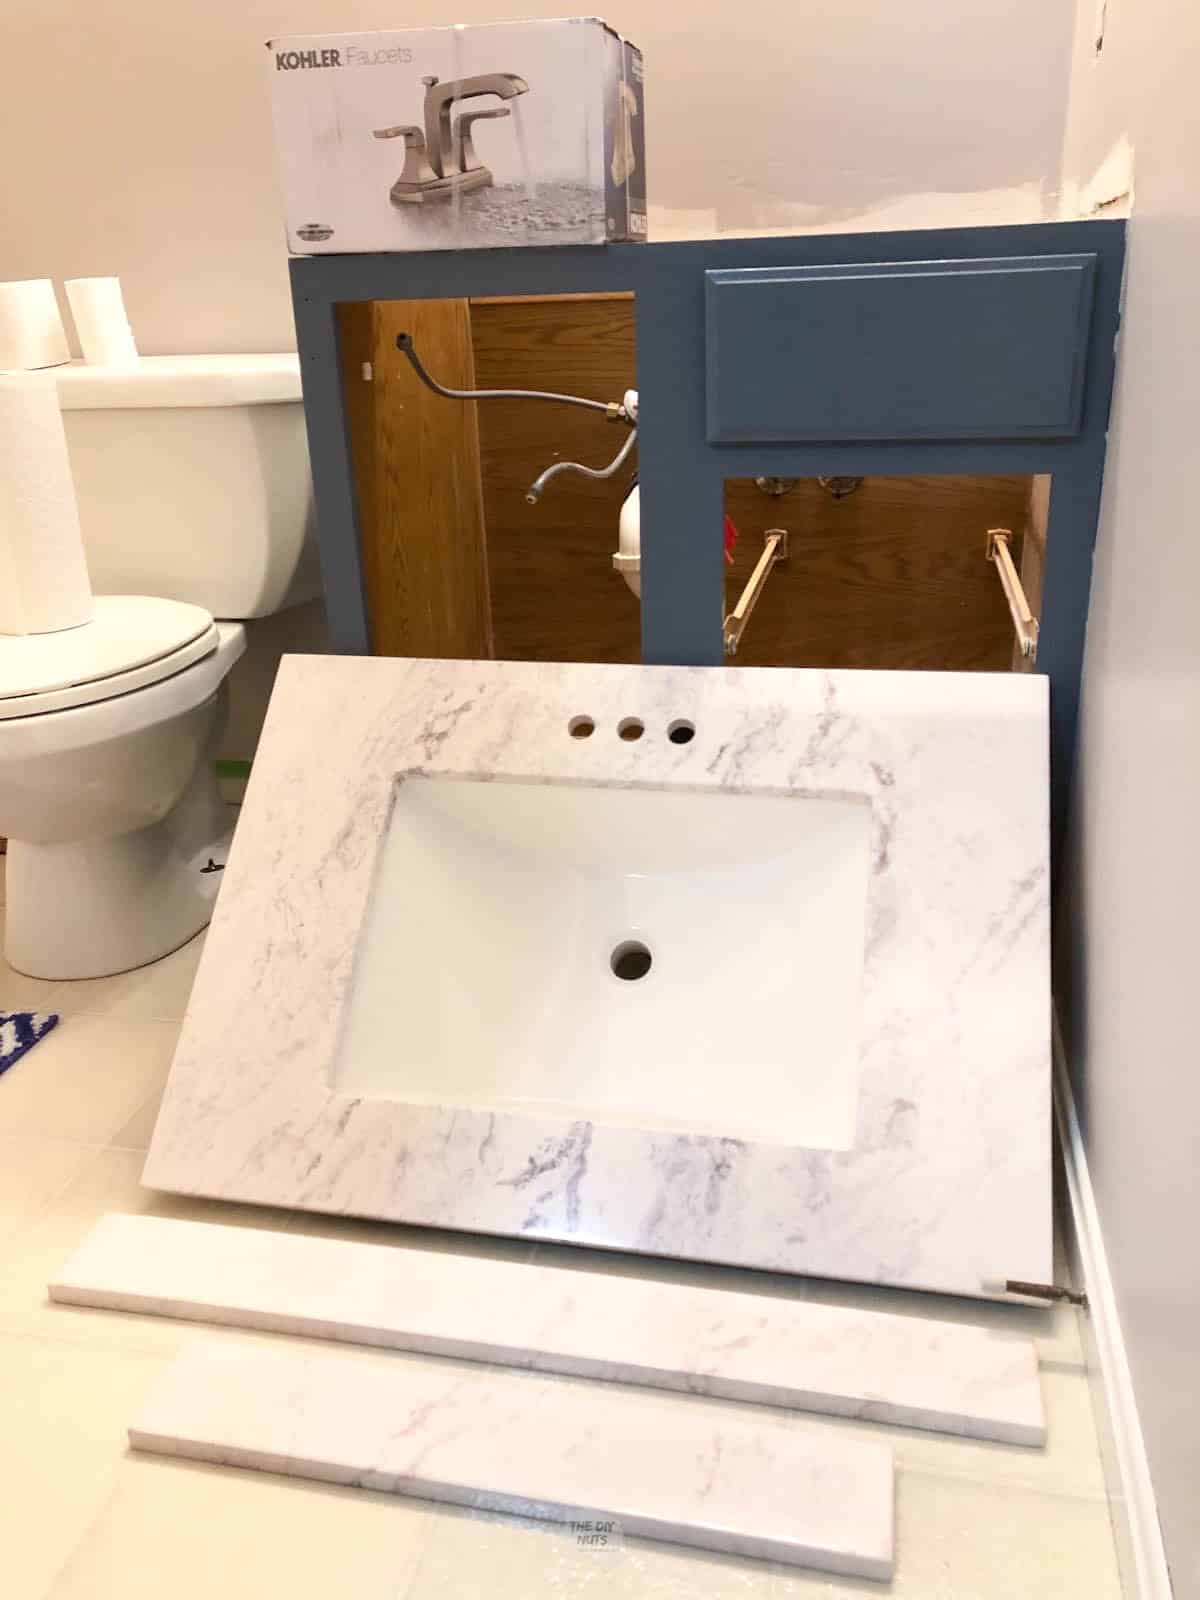 premade marble counter sitting on floor in front of painted bathroom cabinet.